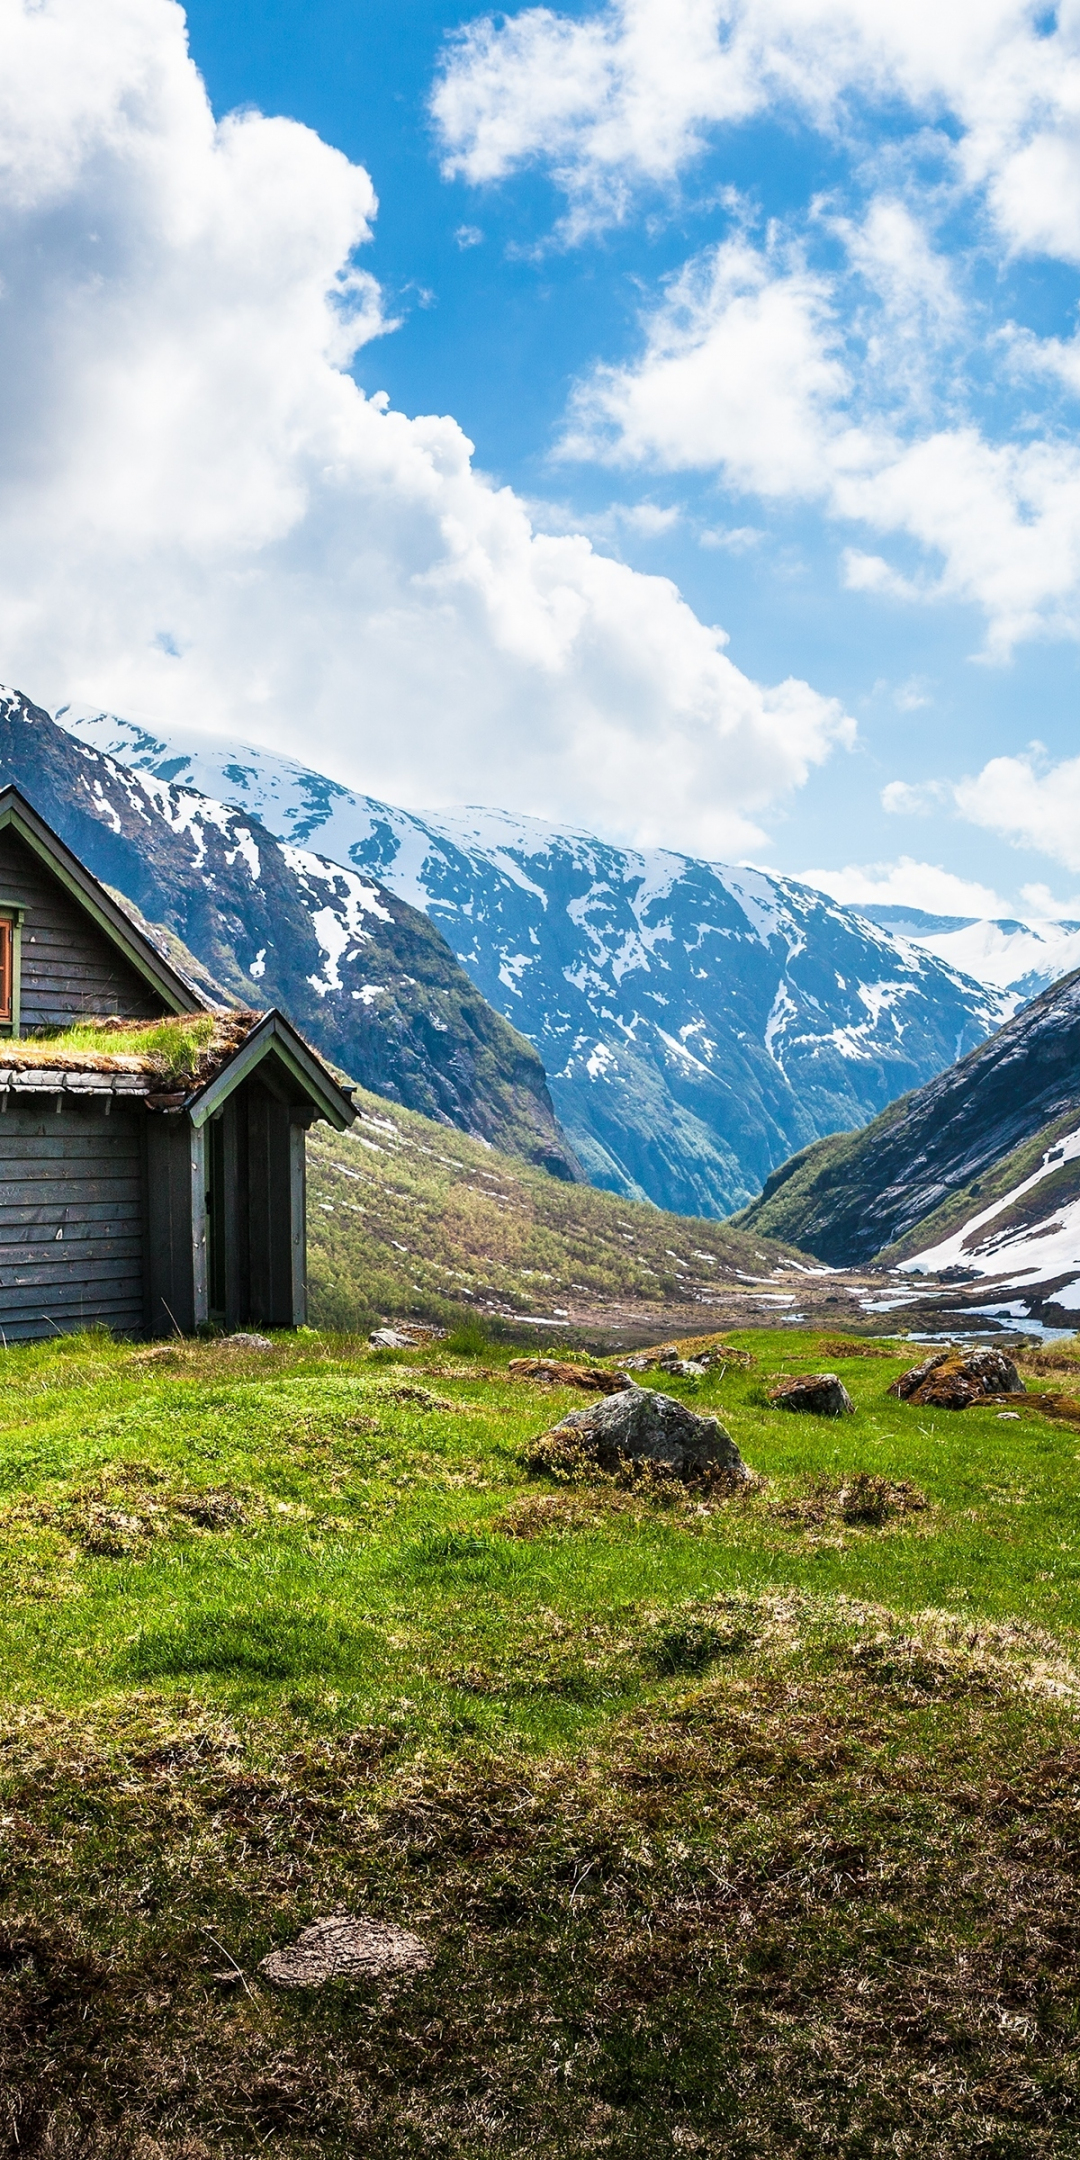 Valley house, wooden cabin, mountains, nature, 1080x2160 wallpaper